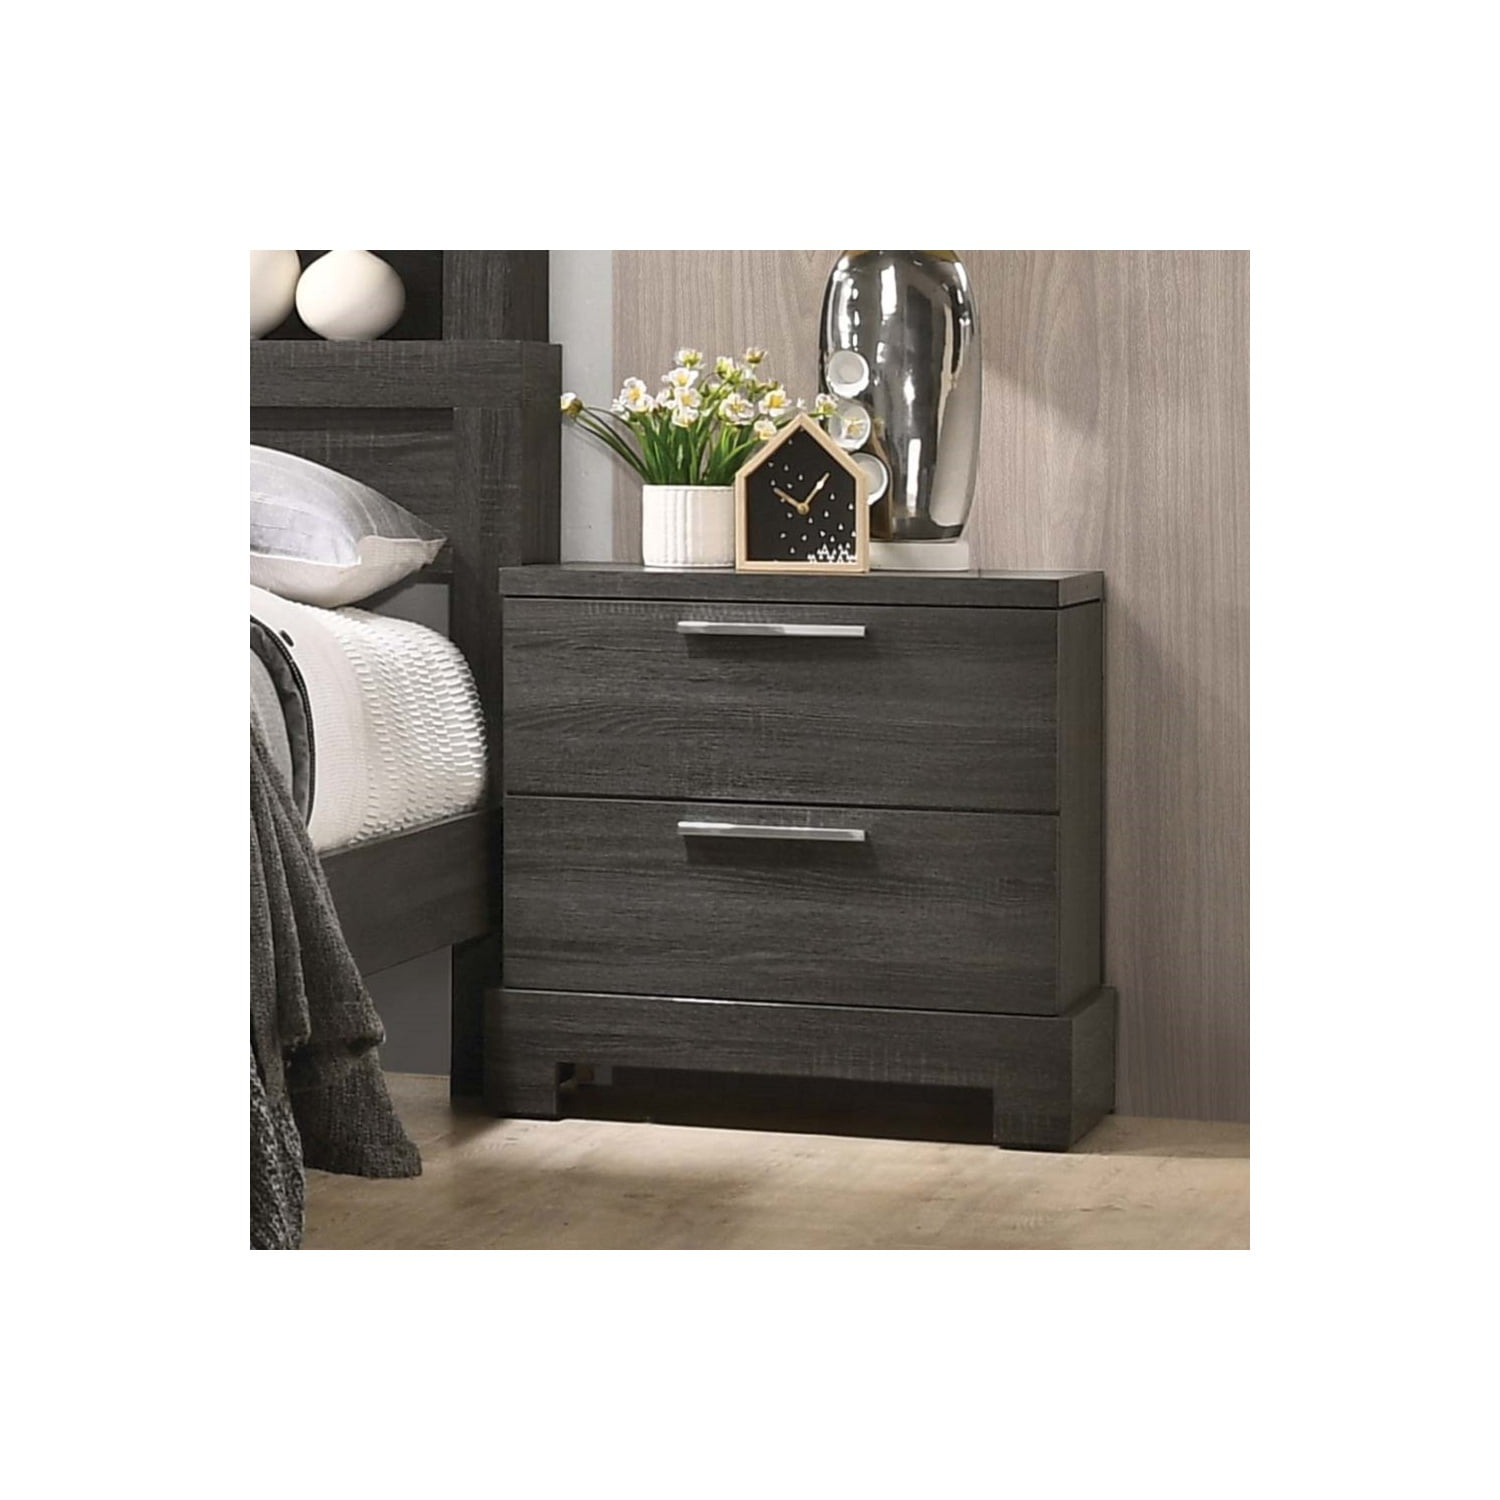 Picture of ACME 22033 Lantha Nightstand, Gray Oak - 25 x 24 x 16 in.